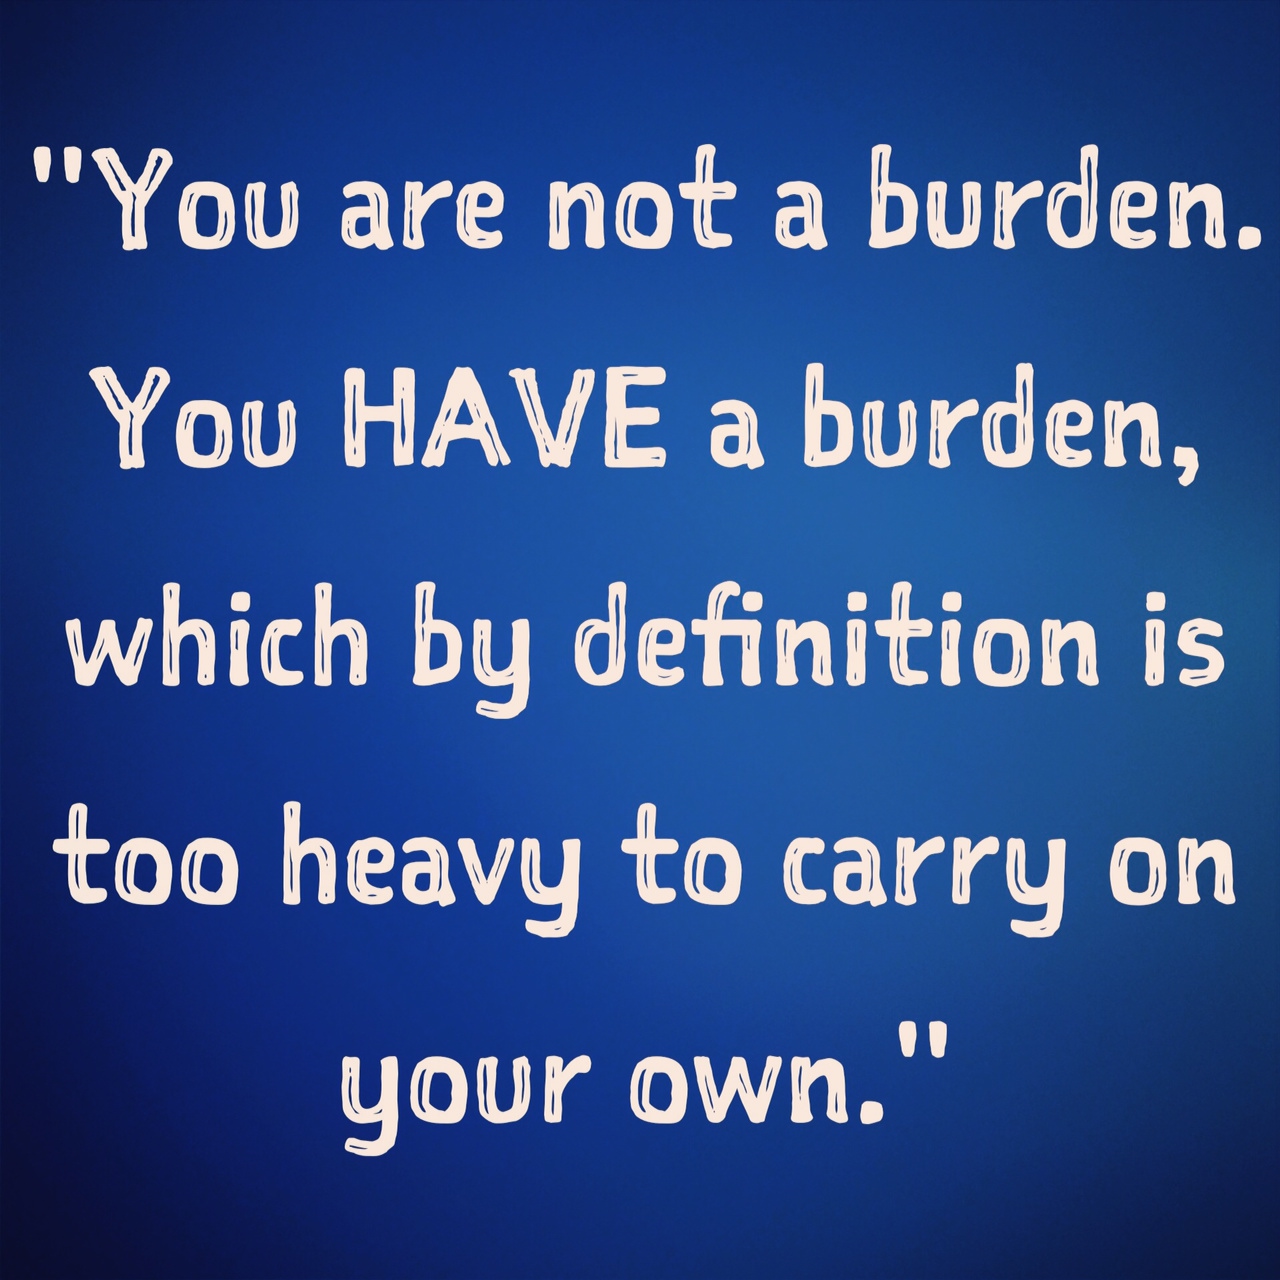 inspirational-quotes-inspiring-quotes-potential-quotes-inner-voice-quotes-you-are-not-a-burden-you-have-a-burden-which-by-definition-is-too-heavy-to-carry-on-yoru-own.